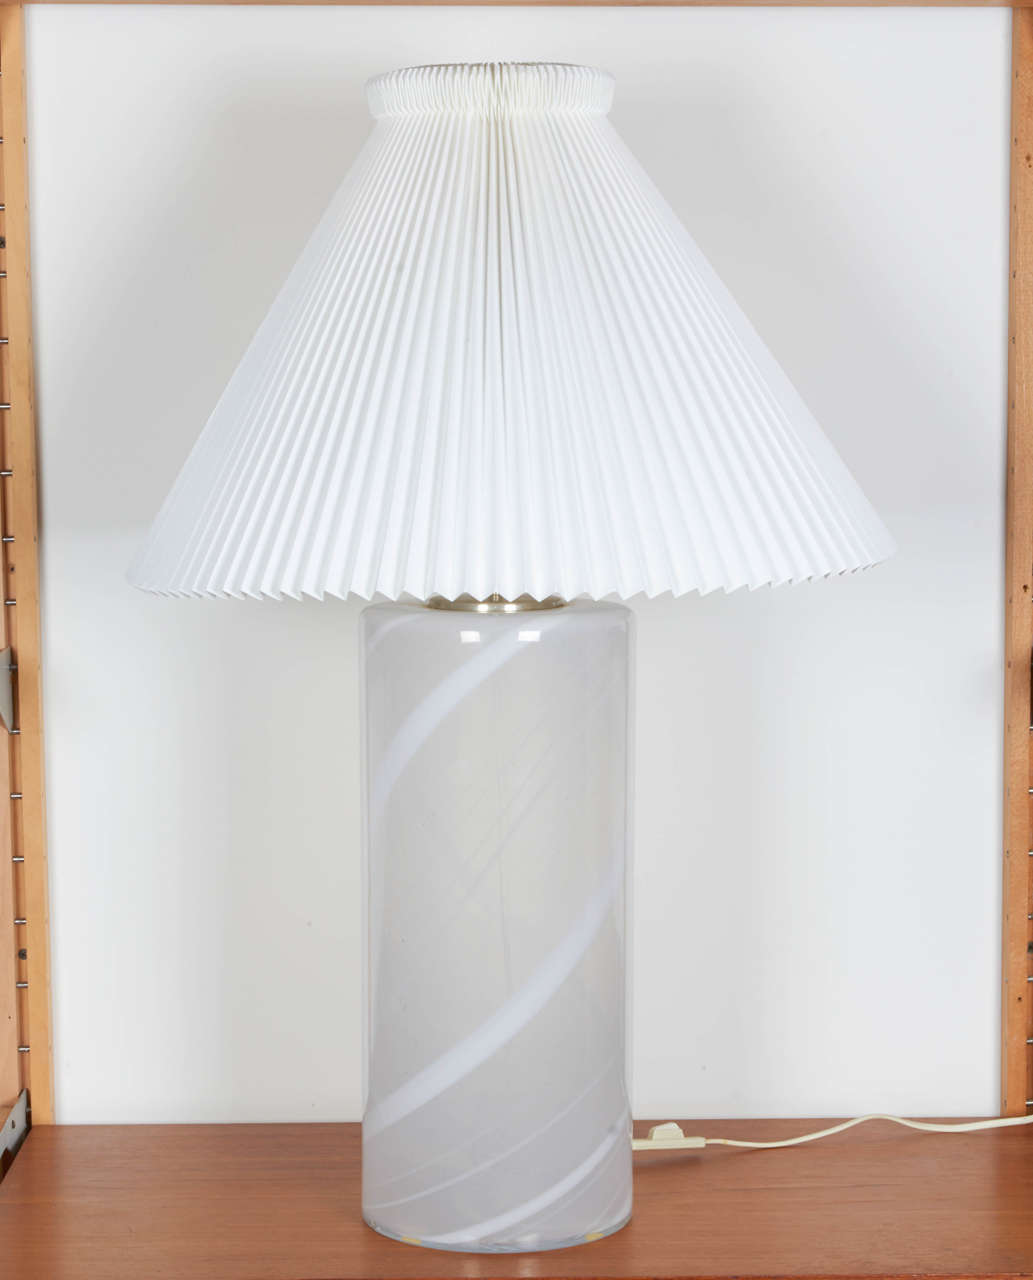 Vintage 1960s White Table Lamp

This mid century table lamp is in excellent condition. The shade is not original, but is by Le Klint. 75 watt max incandescent but more wattage if you use an LED bulb. Ready for pick up, delivery, or shipping anywhere